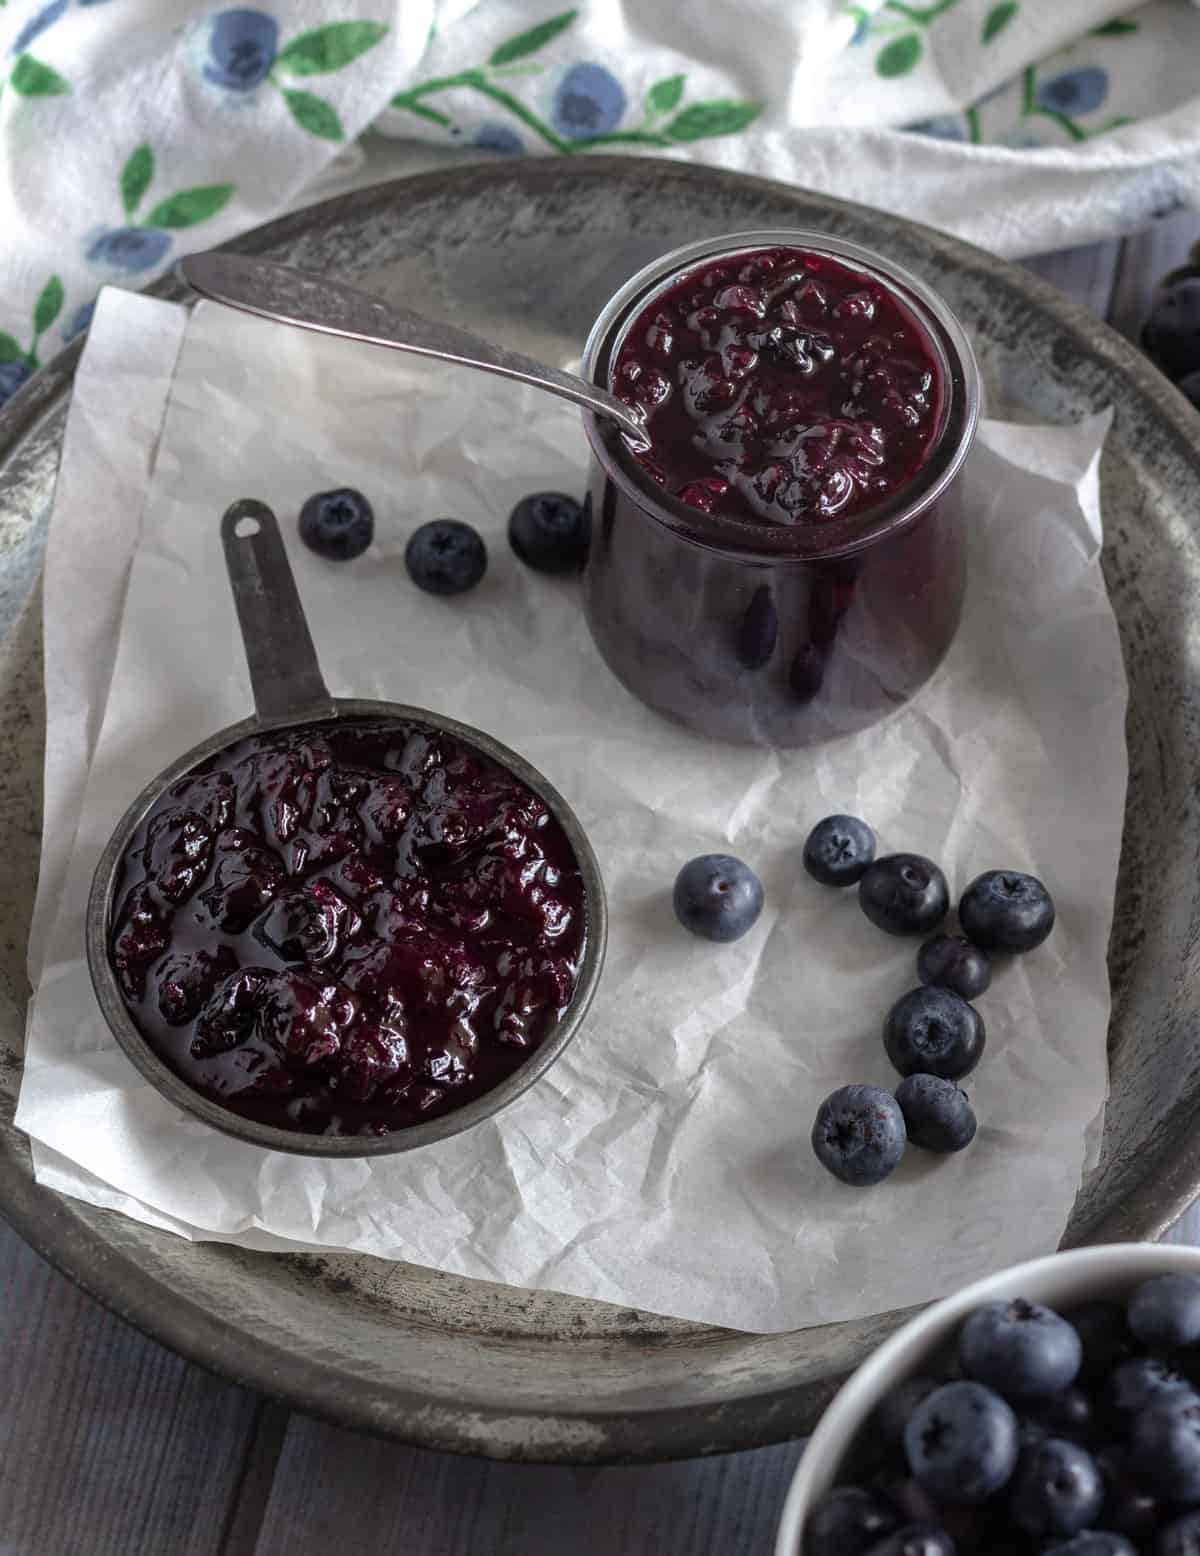 Blueberries with jars of blueberry ketchup.